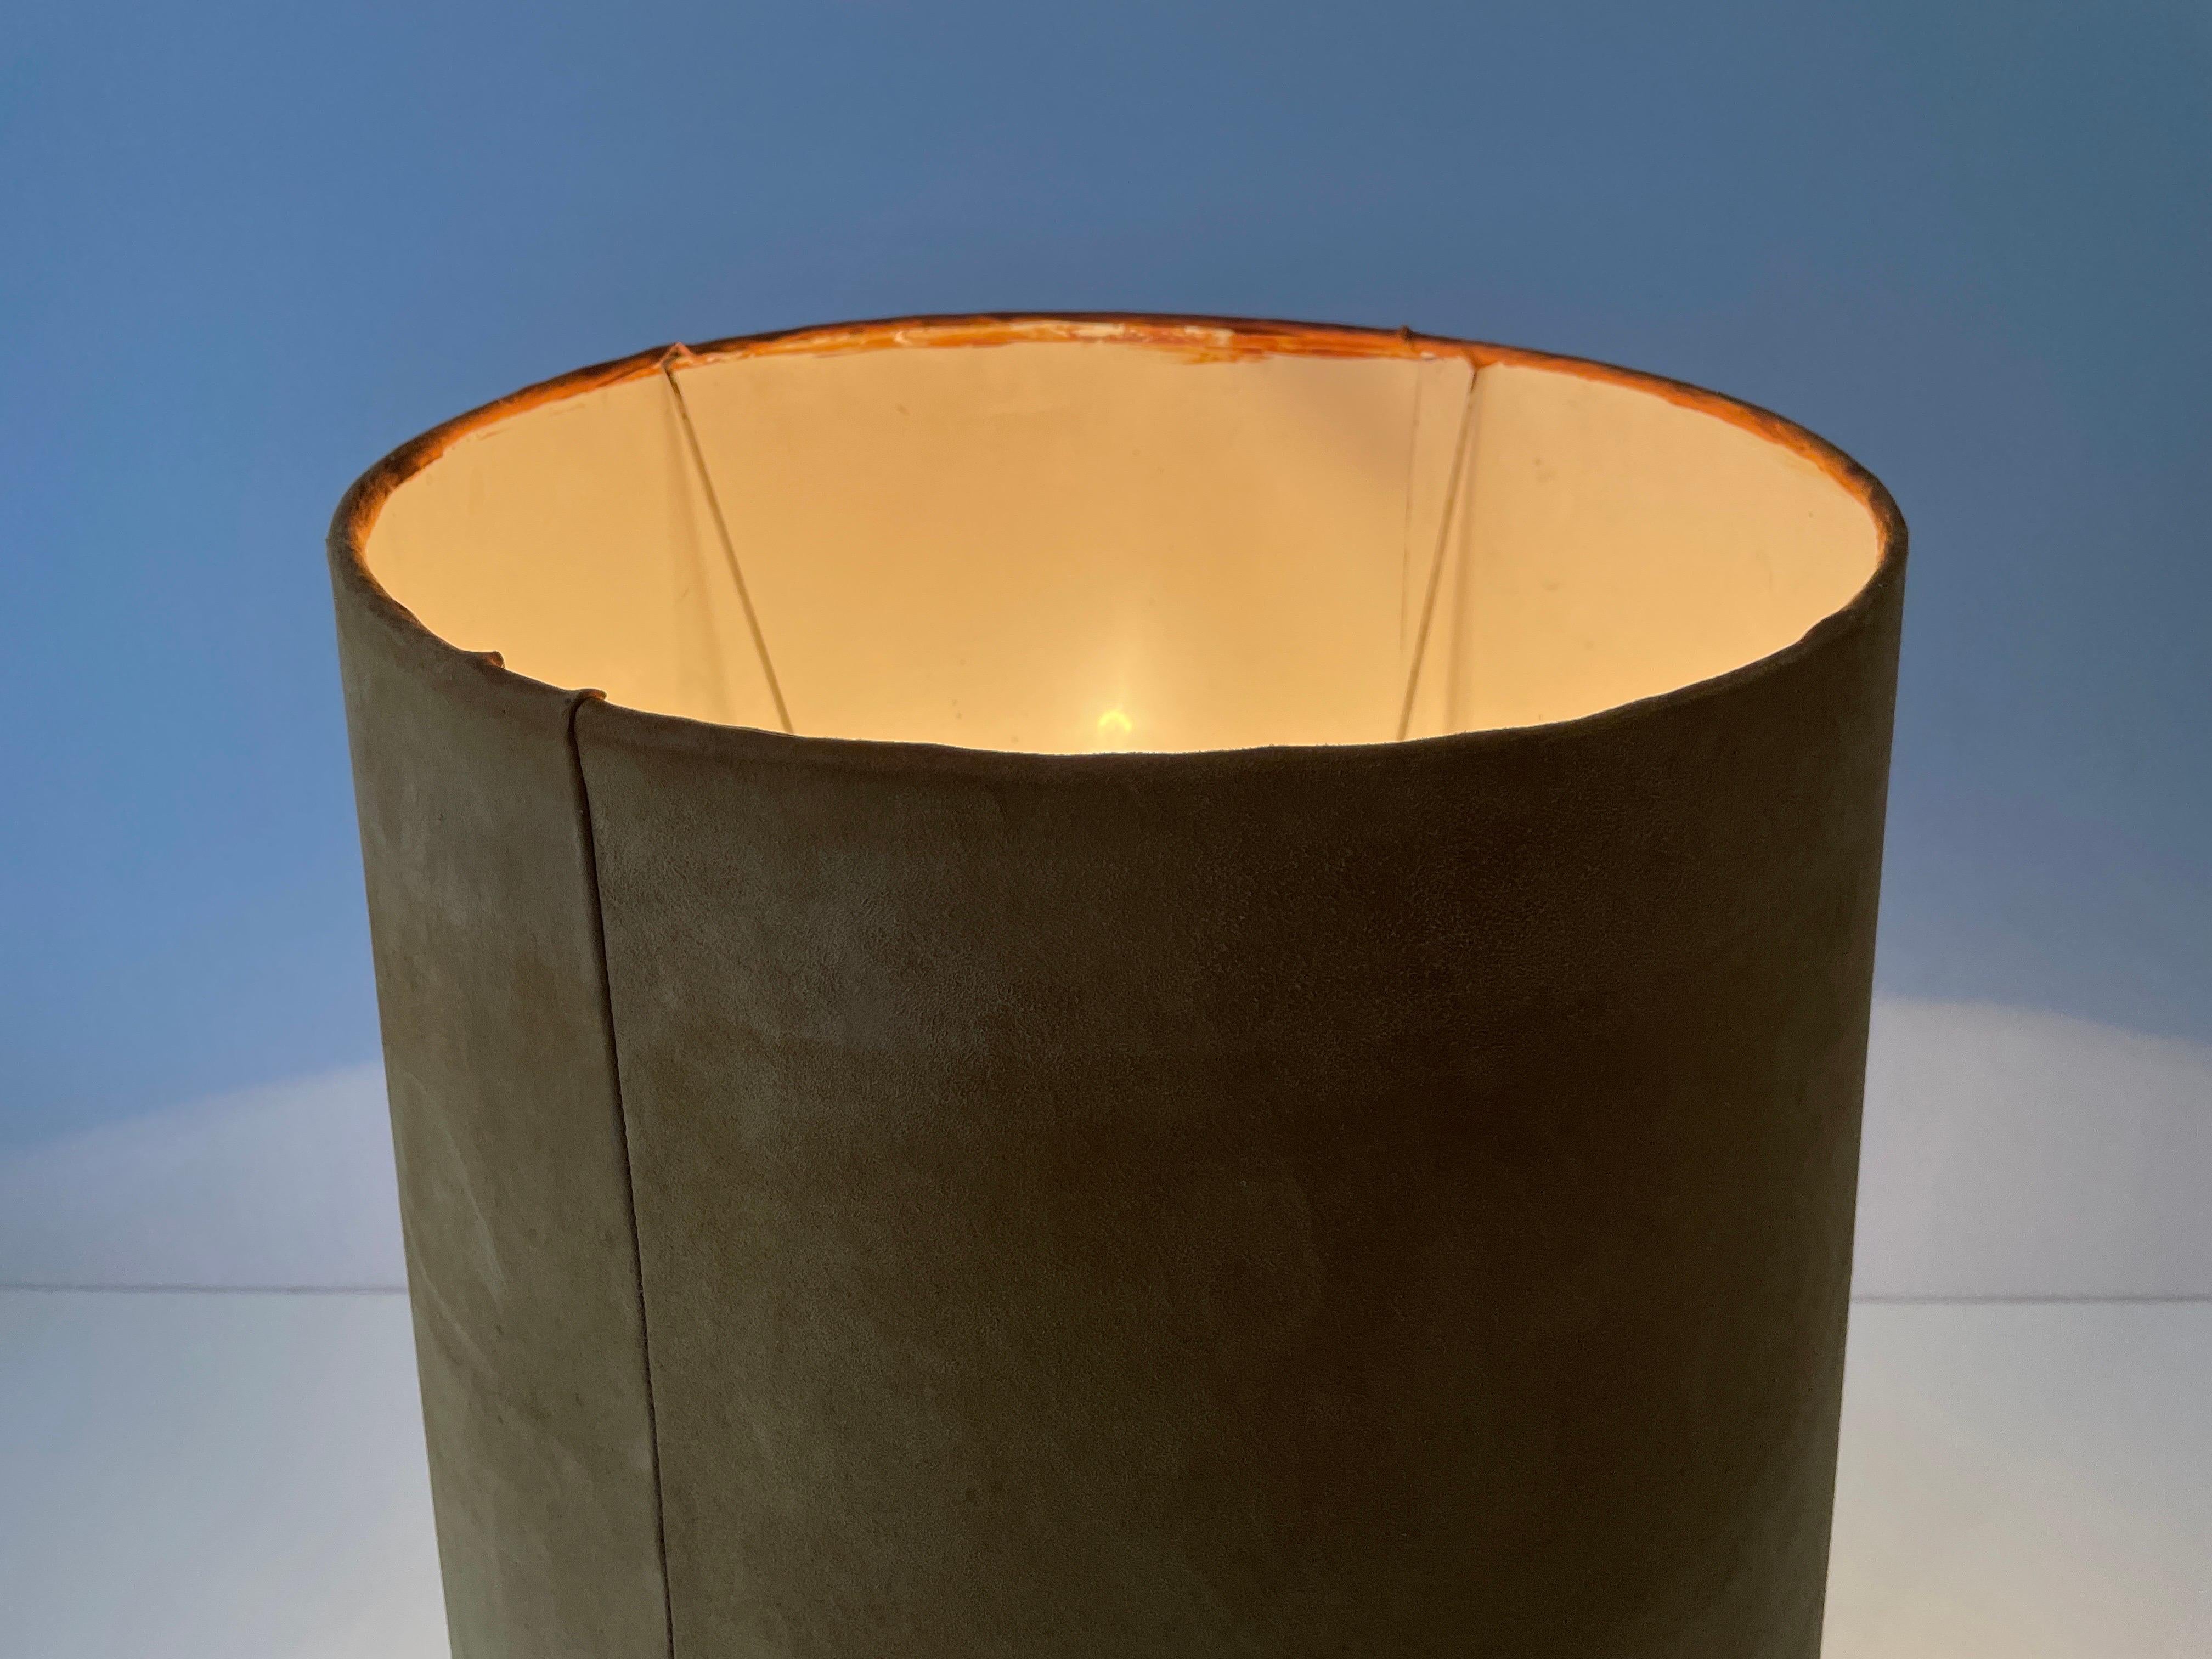 Tan Suede Leather and Glass Shade Floor or Table Lamp, 1960s, Denmark For Sale 9